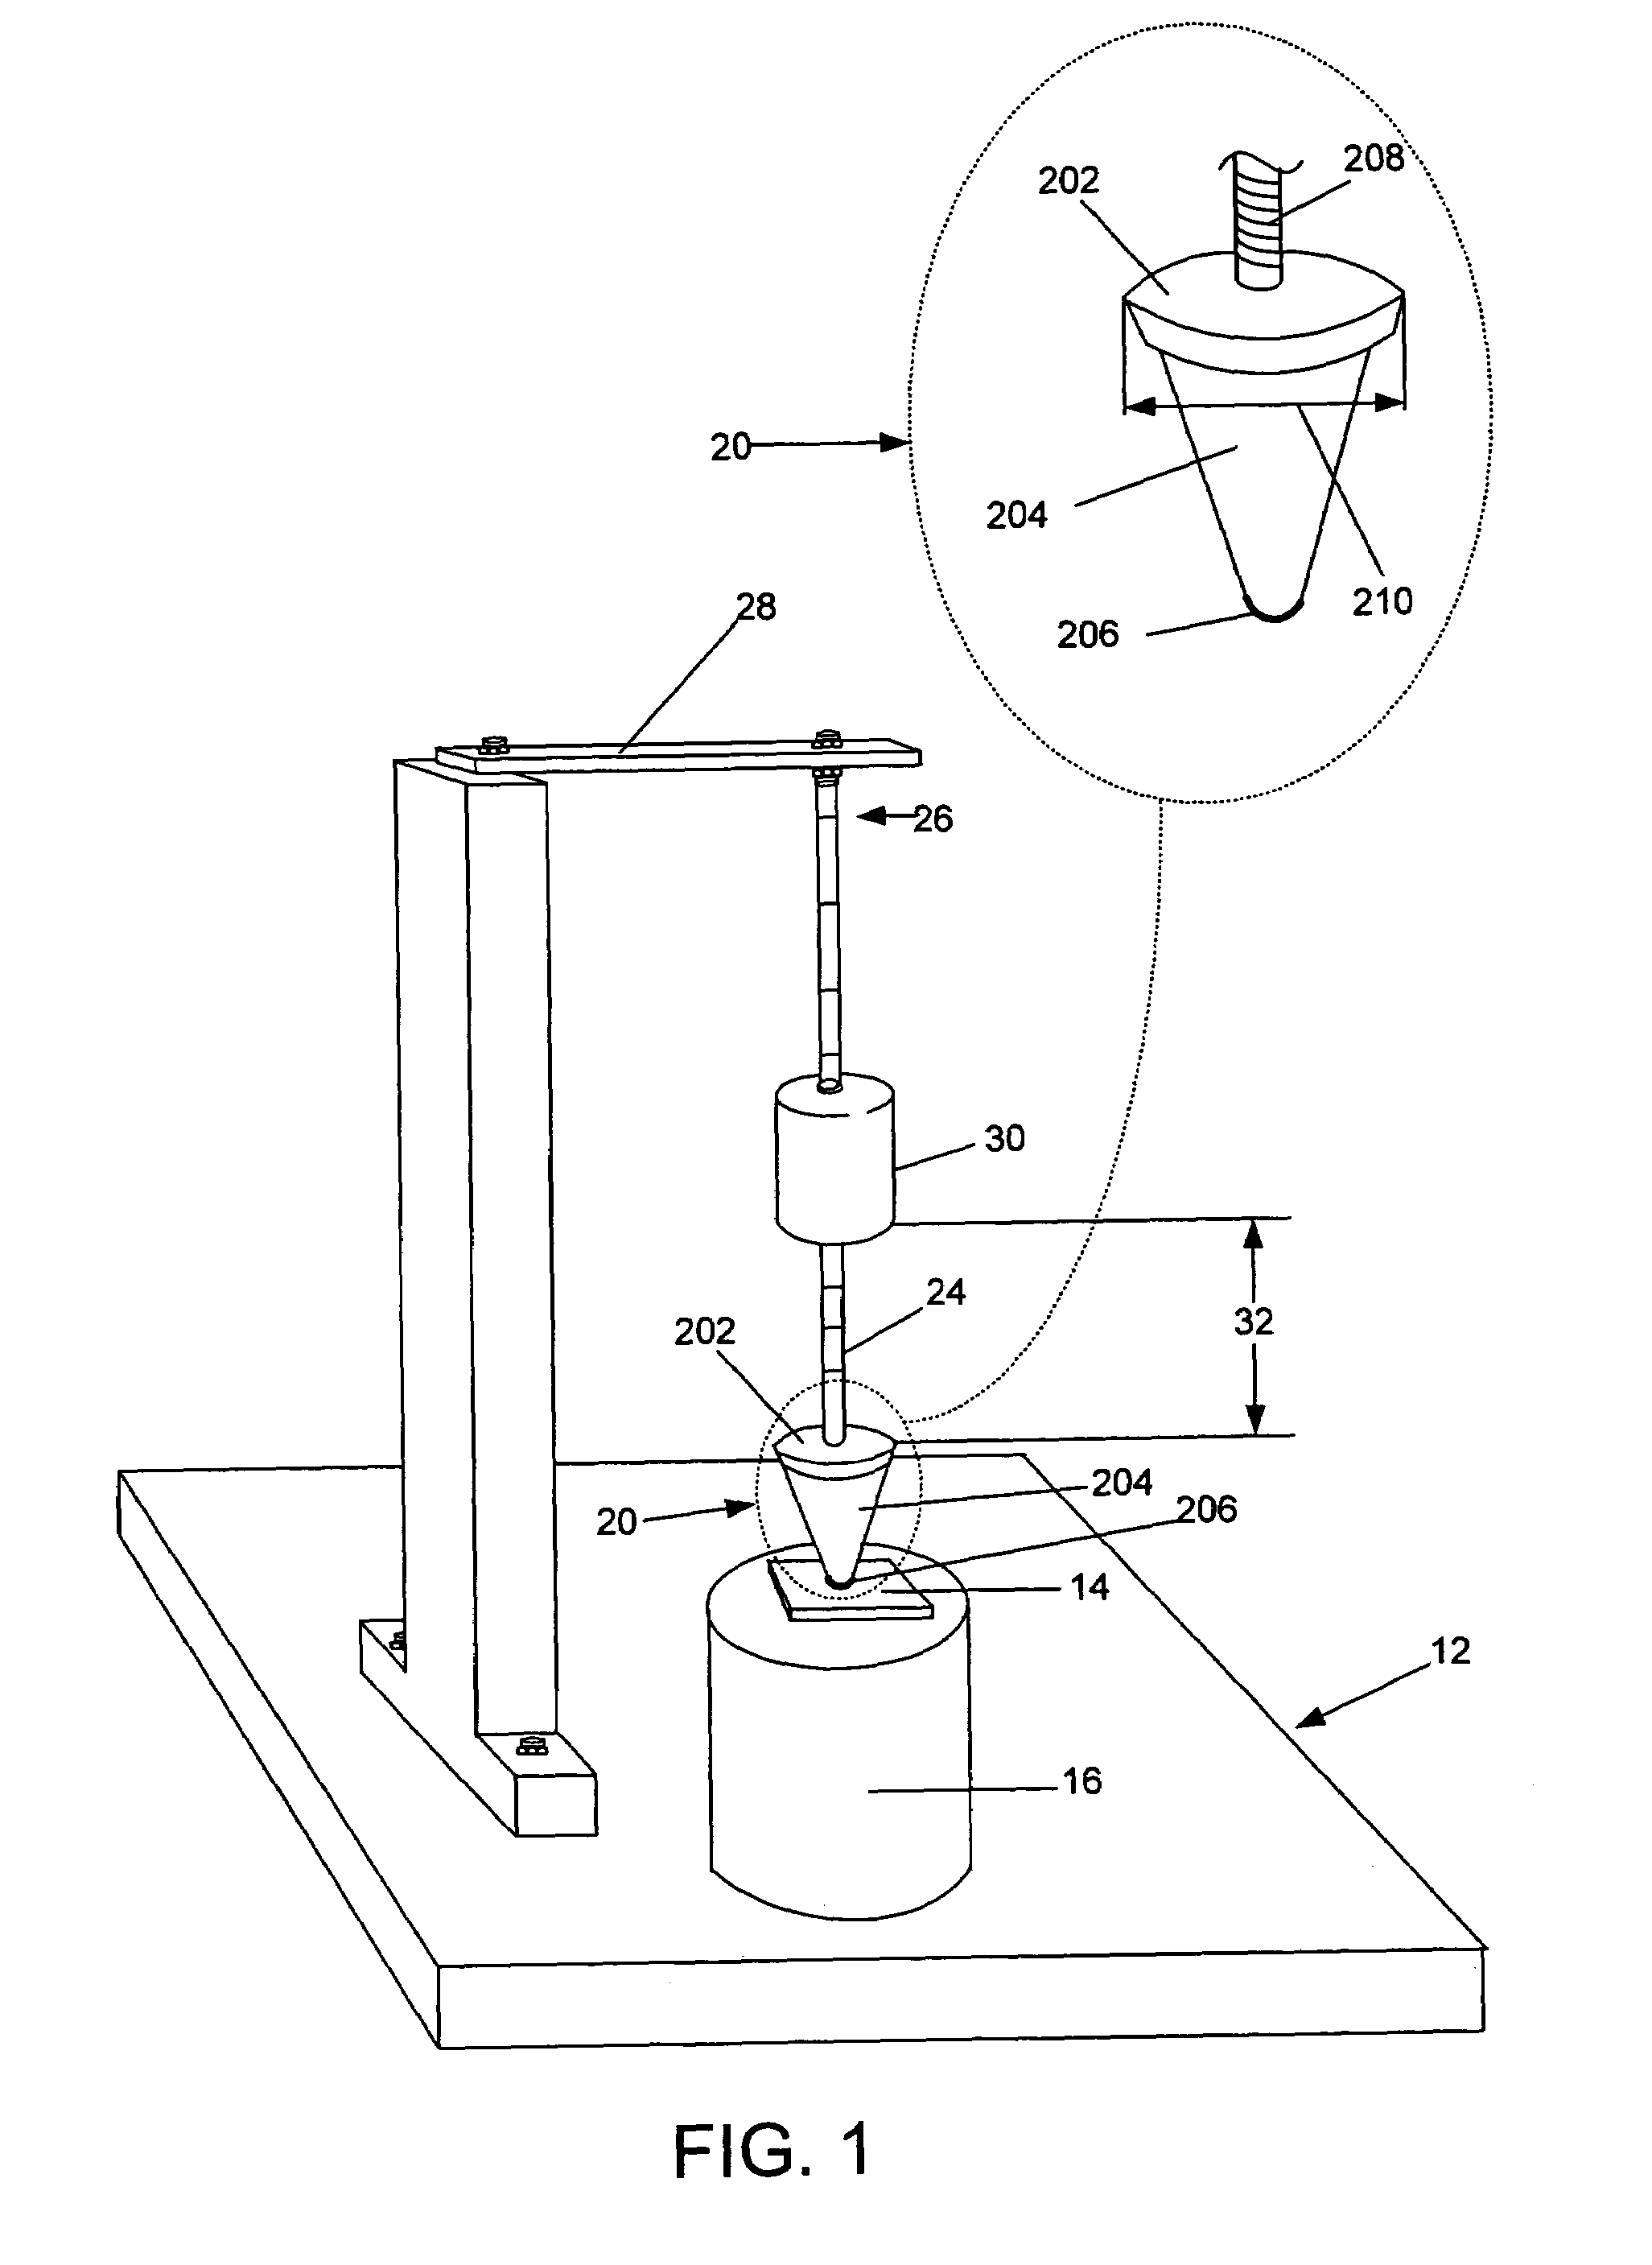 Method and apparatus for dynamic impact testing